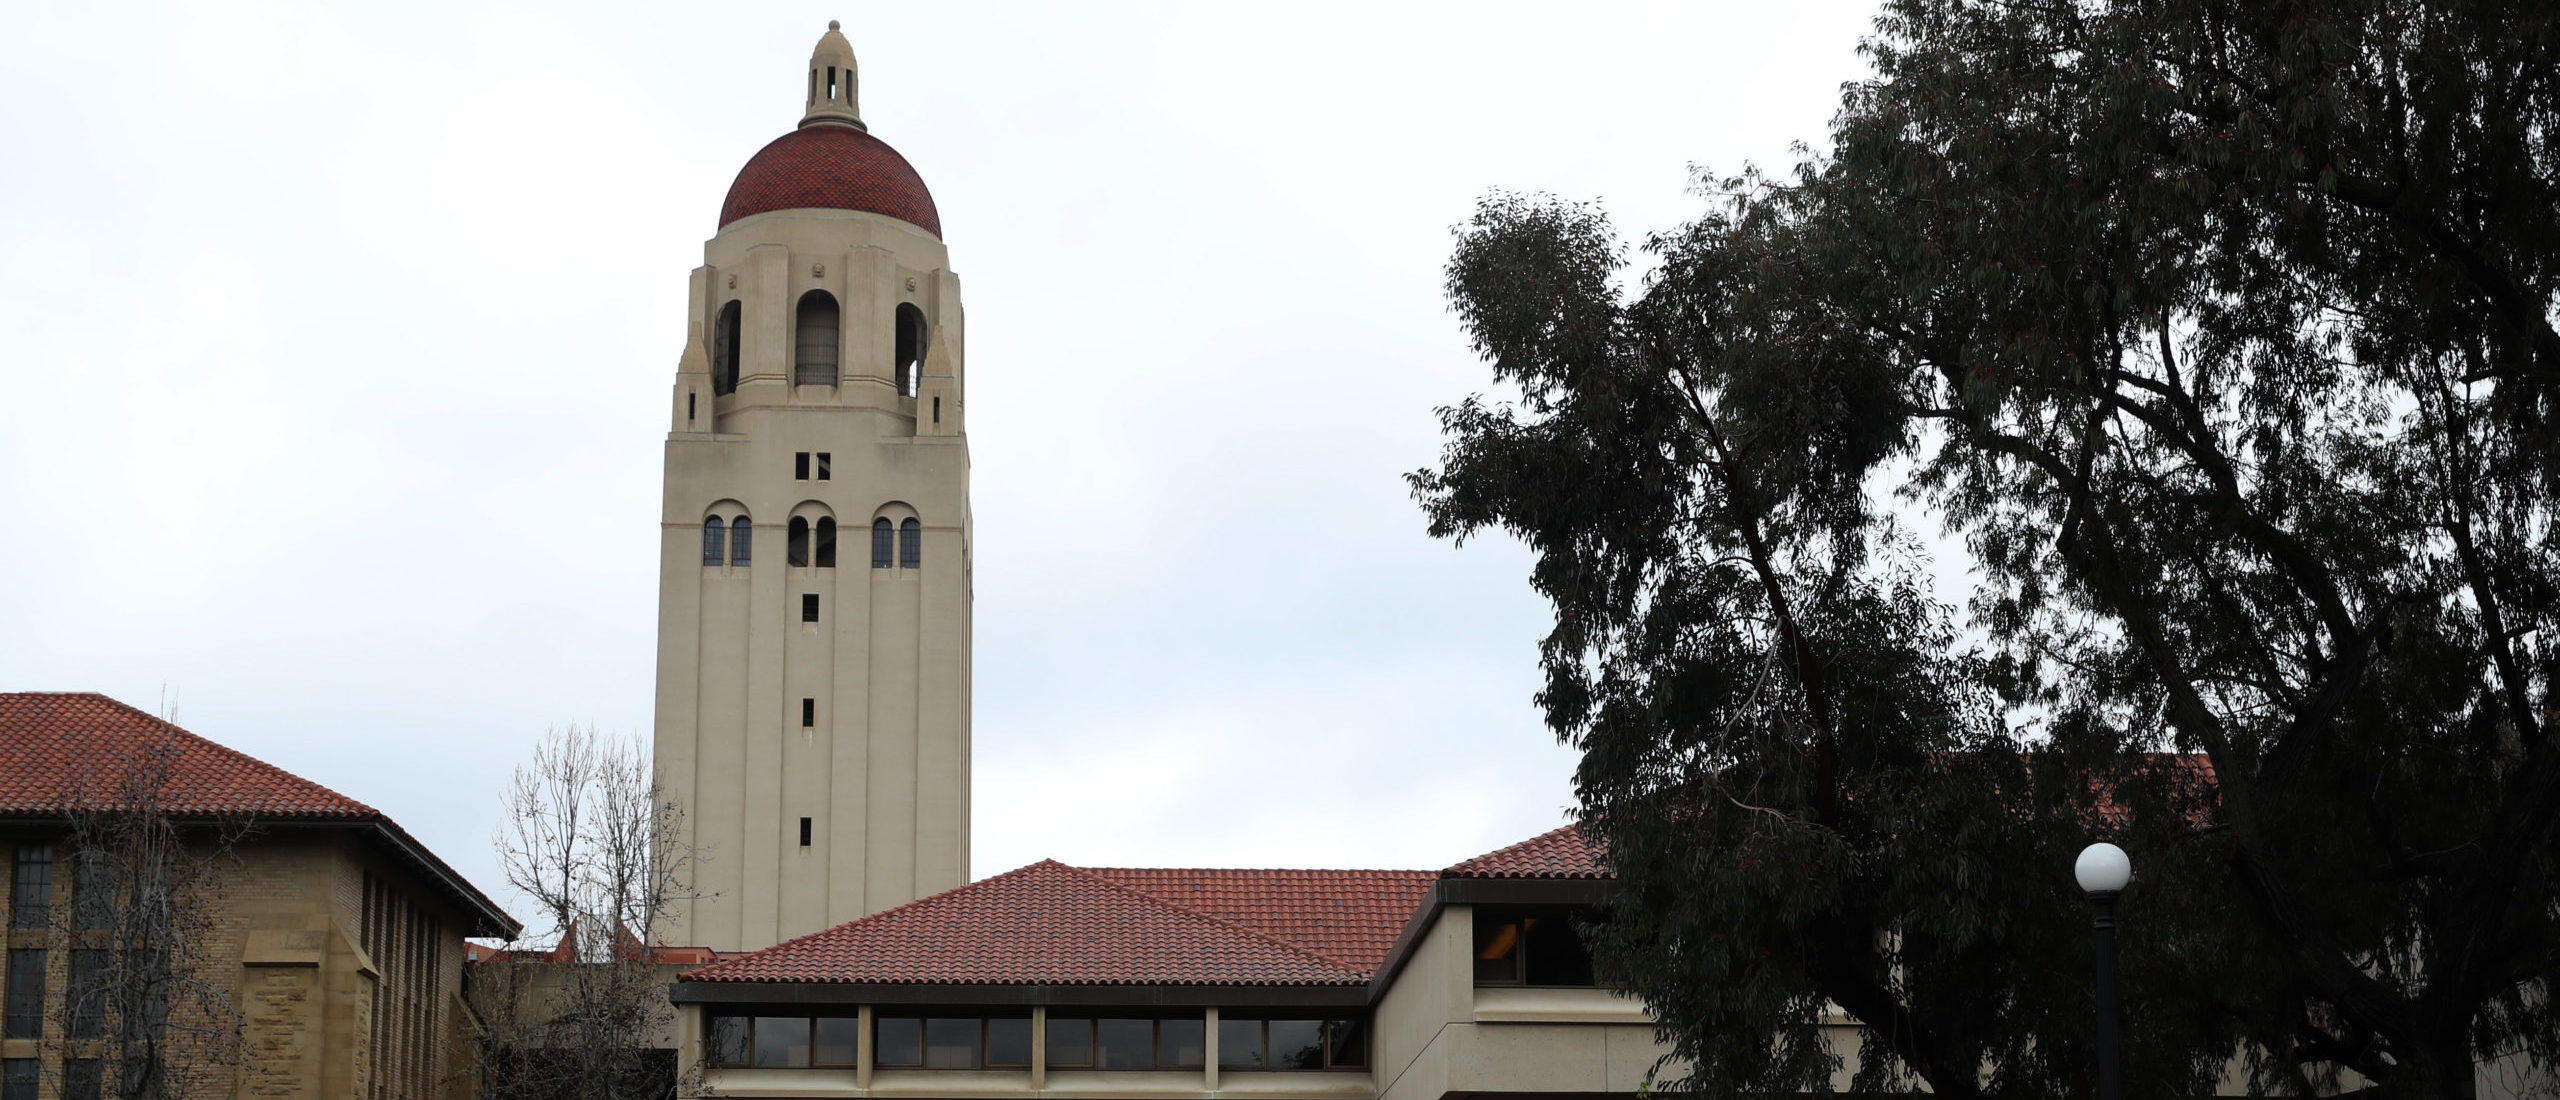 STANFORD, CALIFORNIA - MARCH 12: People walk by Hoover Tower on the Stanford University campus on March 12, 2019 in Stanford, California. More than 40 people, including actresses Lori Loughlin and Felicity Huffman, have been charged in a widespread elite college admission bribery scheme. Parents, ACT and SAT administrators and coaches at universities including Stanford, Georgetown, Yale, and the University of Southern California have been charged. (Photo by Justin Sullivan/Getty Images)